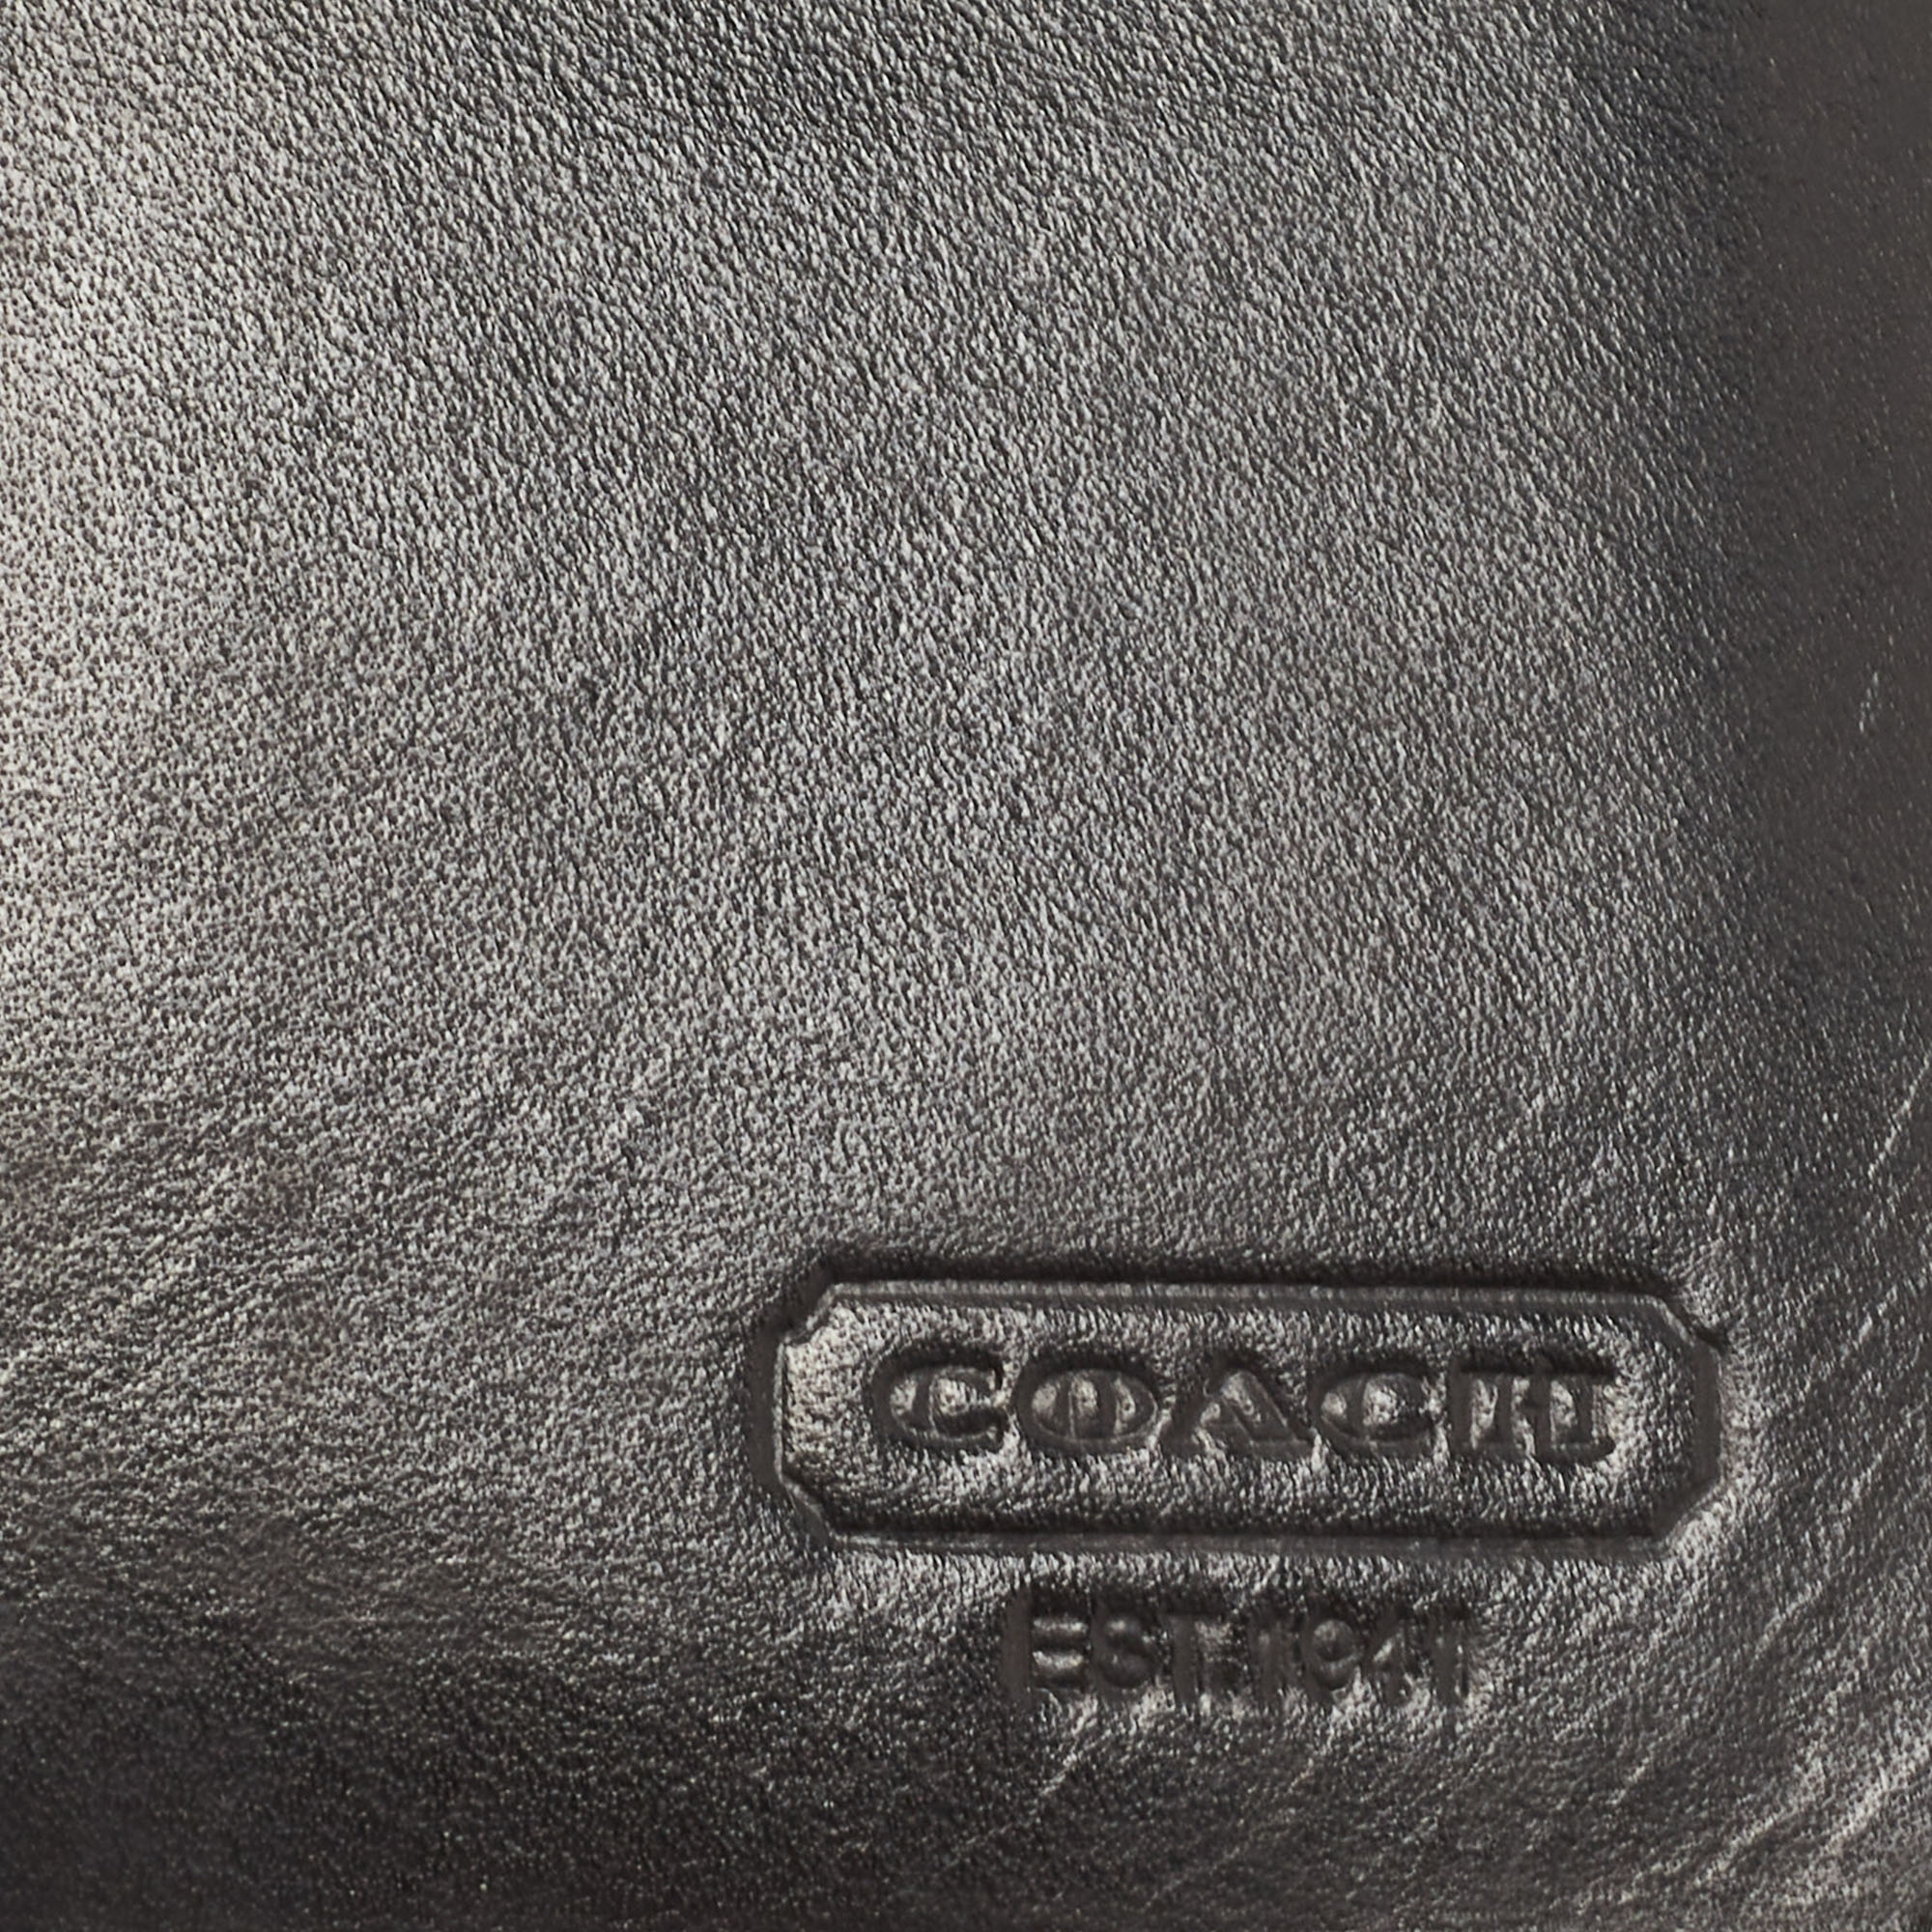 Coach Black Signature Embossed Leather Breast Pocket Long Wallet